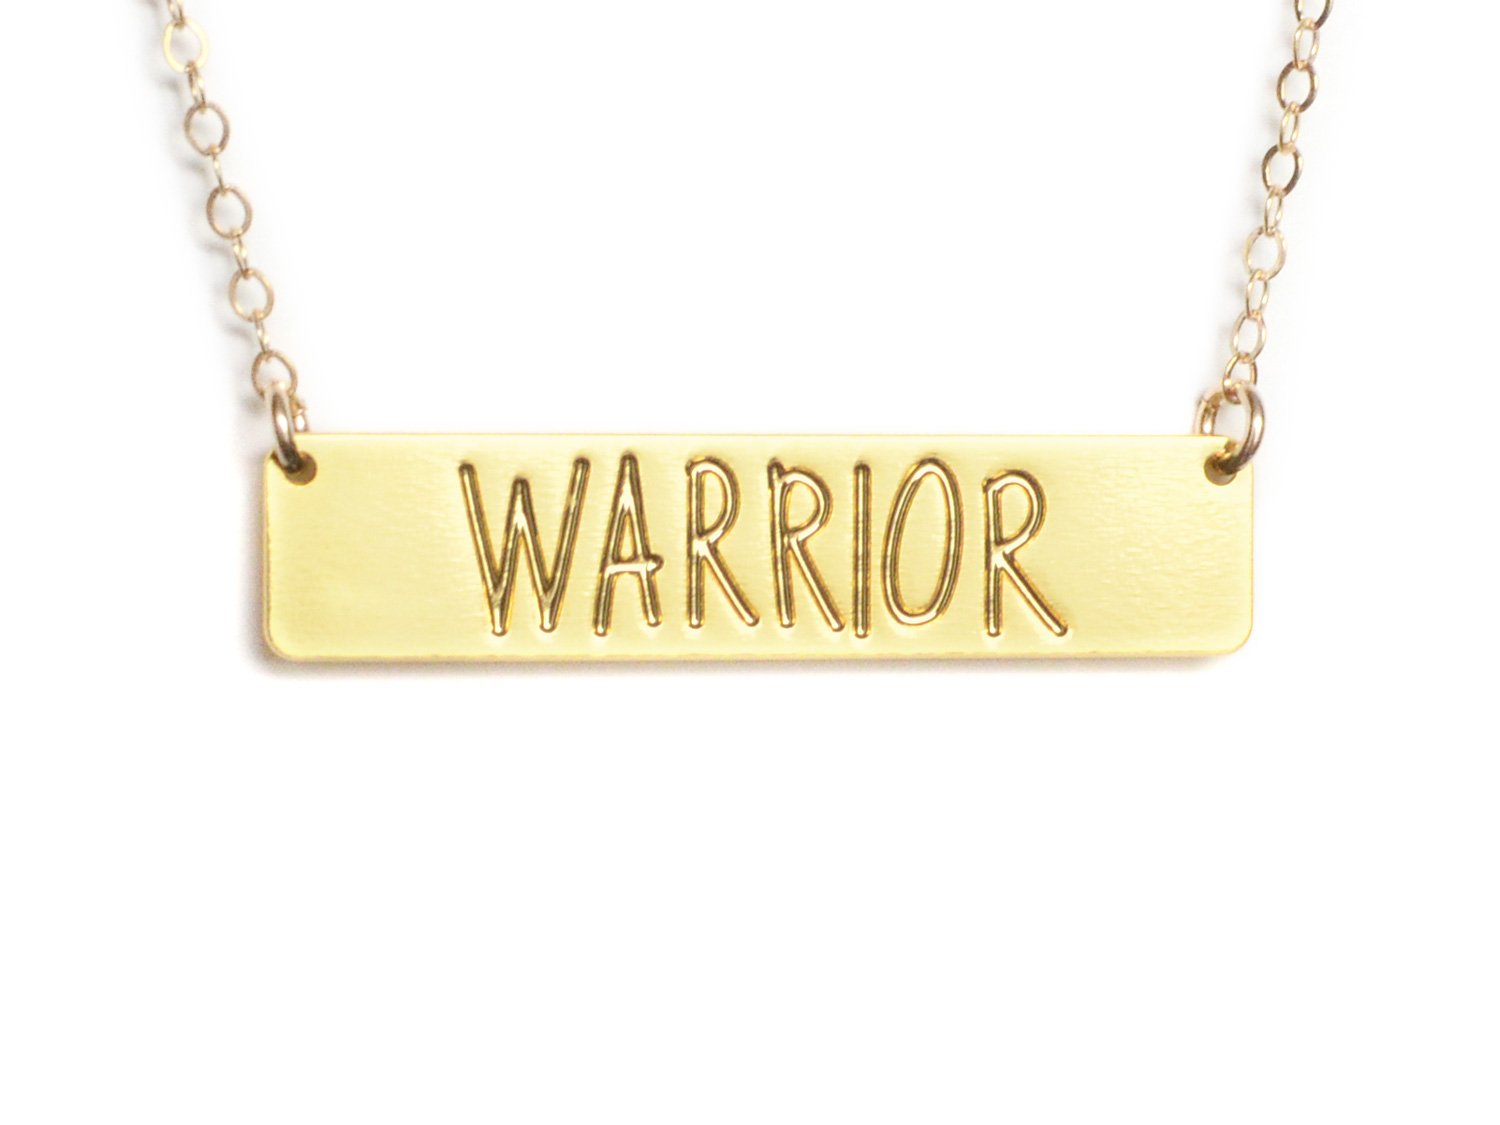 Warrior Bar Necklace - High Quality, Affordable, Hand Written, Empowering, Self Love, Mantra Word Necklace - Available in Gold and Silver - Made in USA - Brevity Jewelry